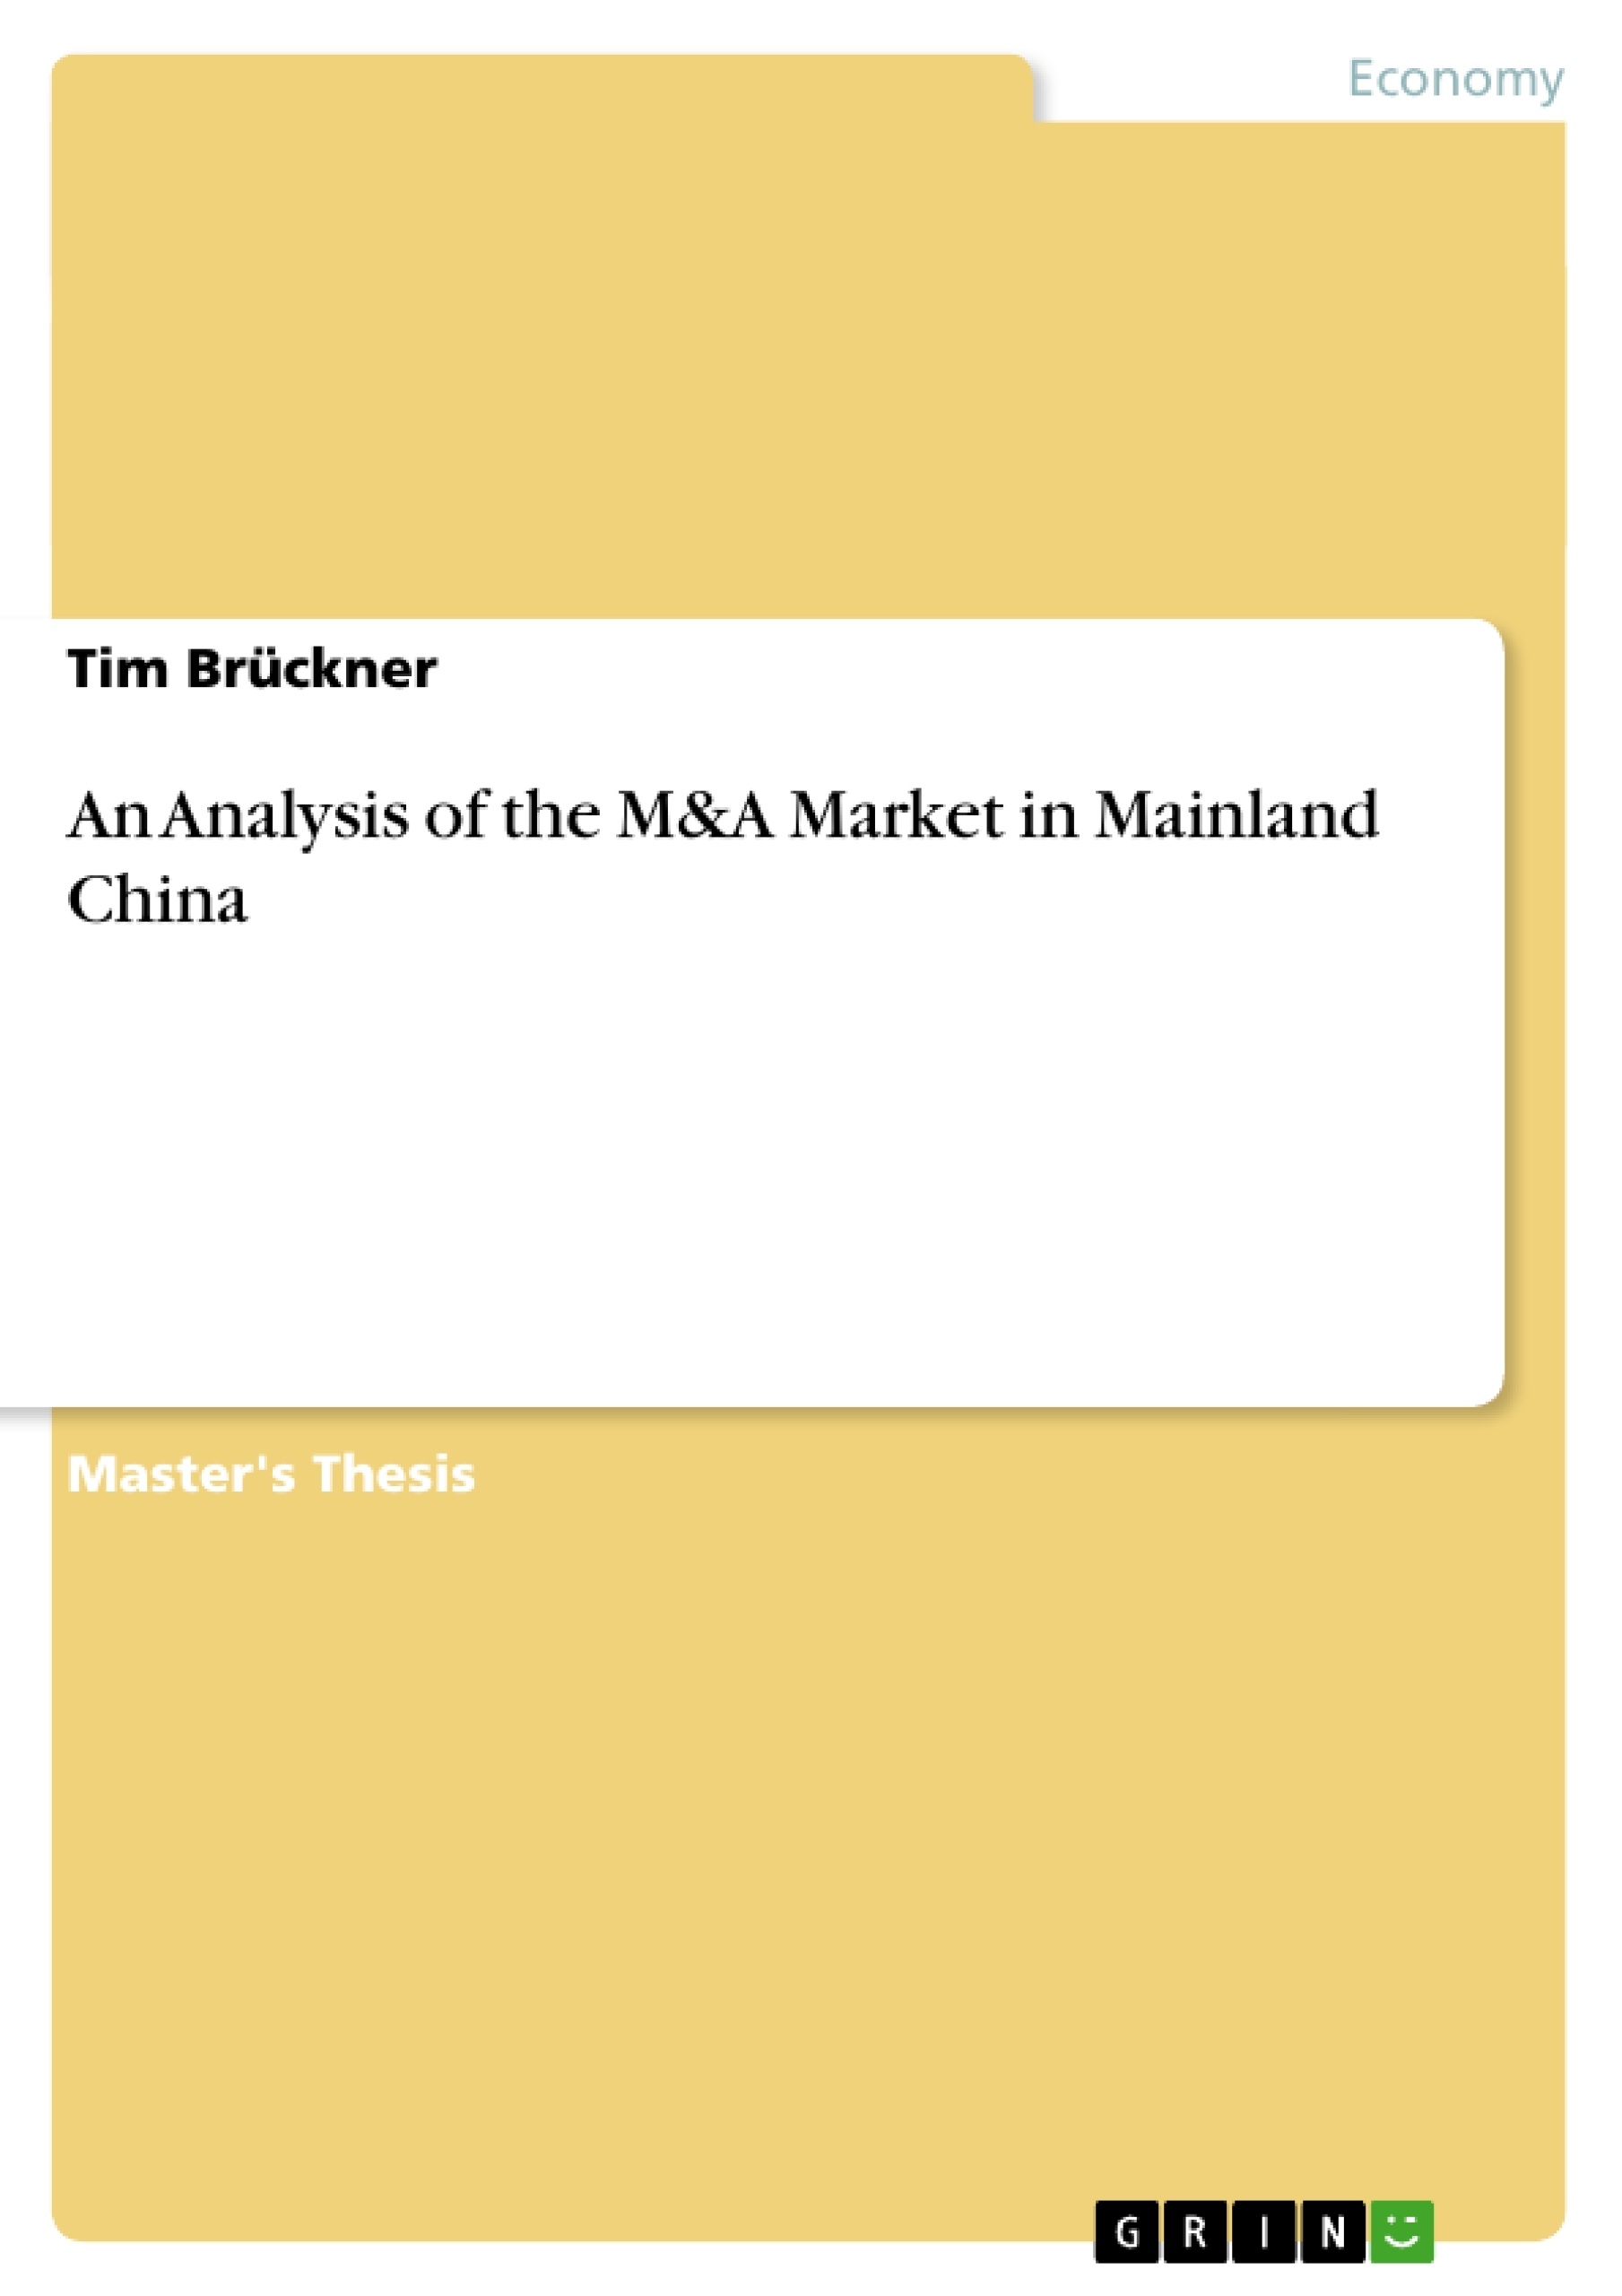 Titel: An Analysis of the M&A Market in Mainland China